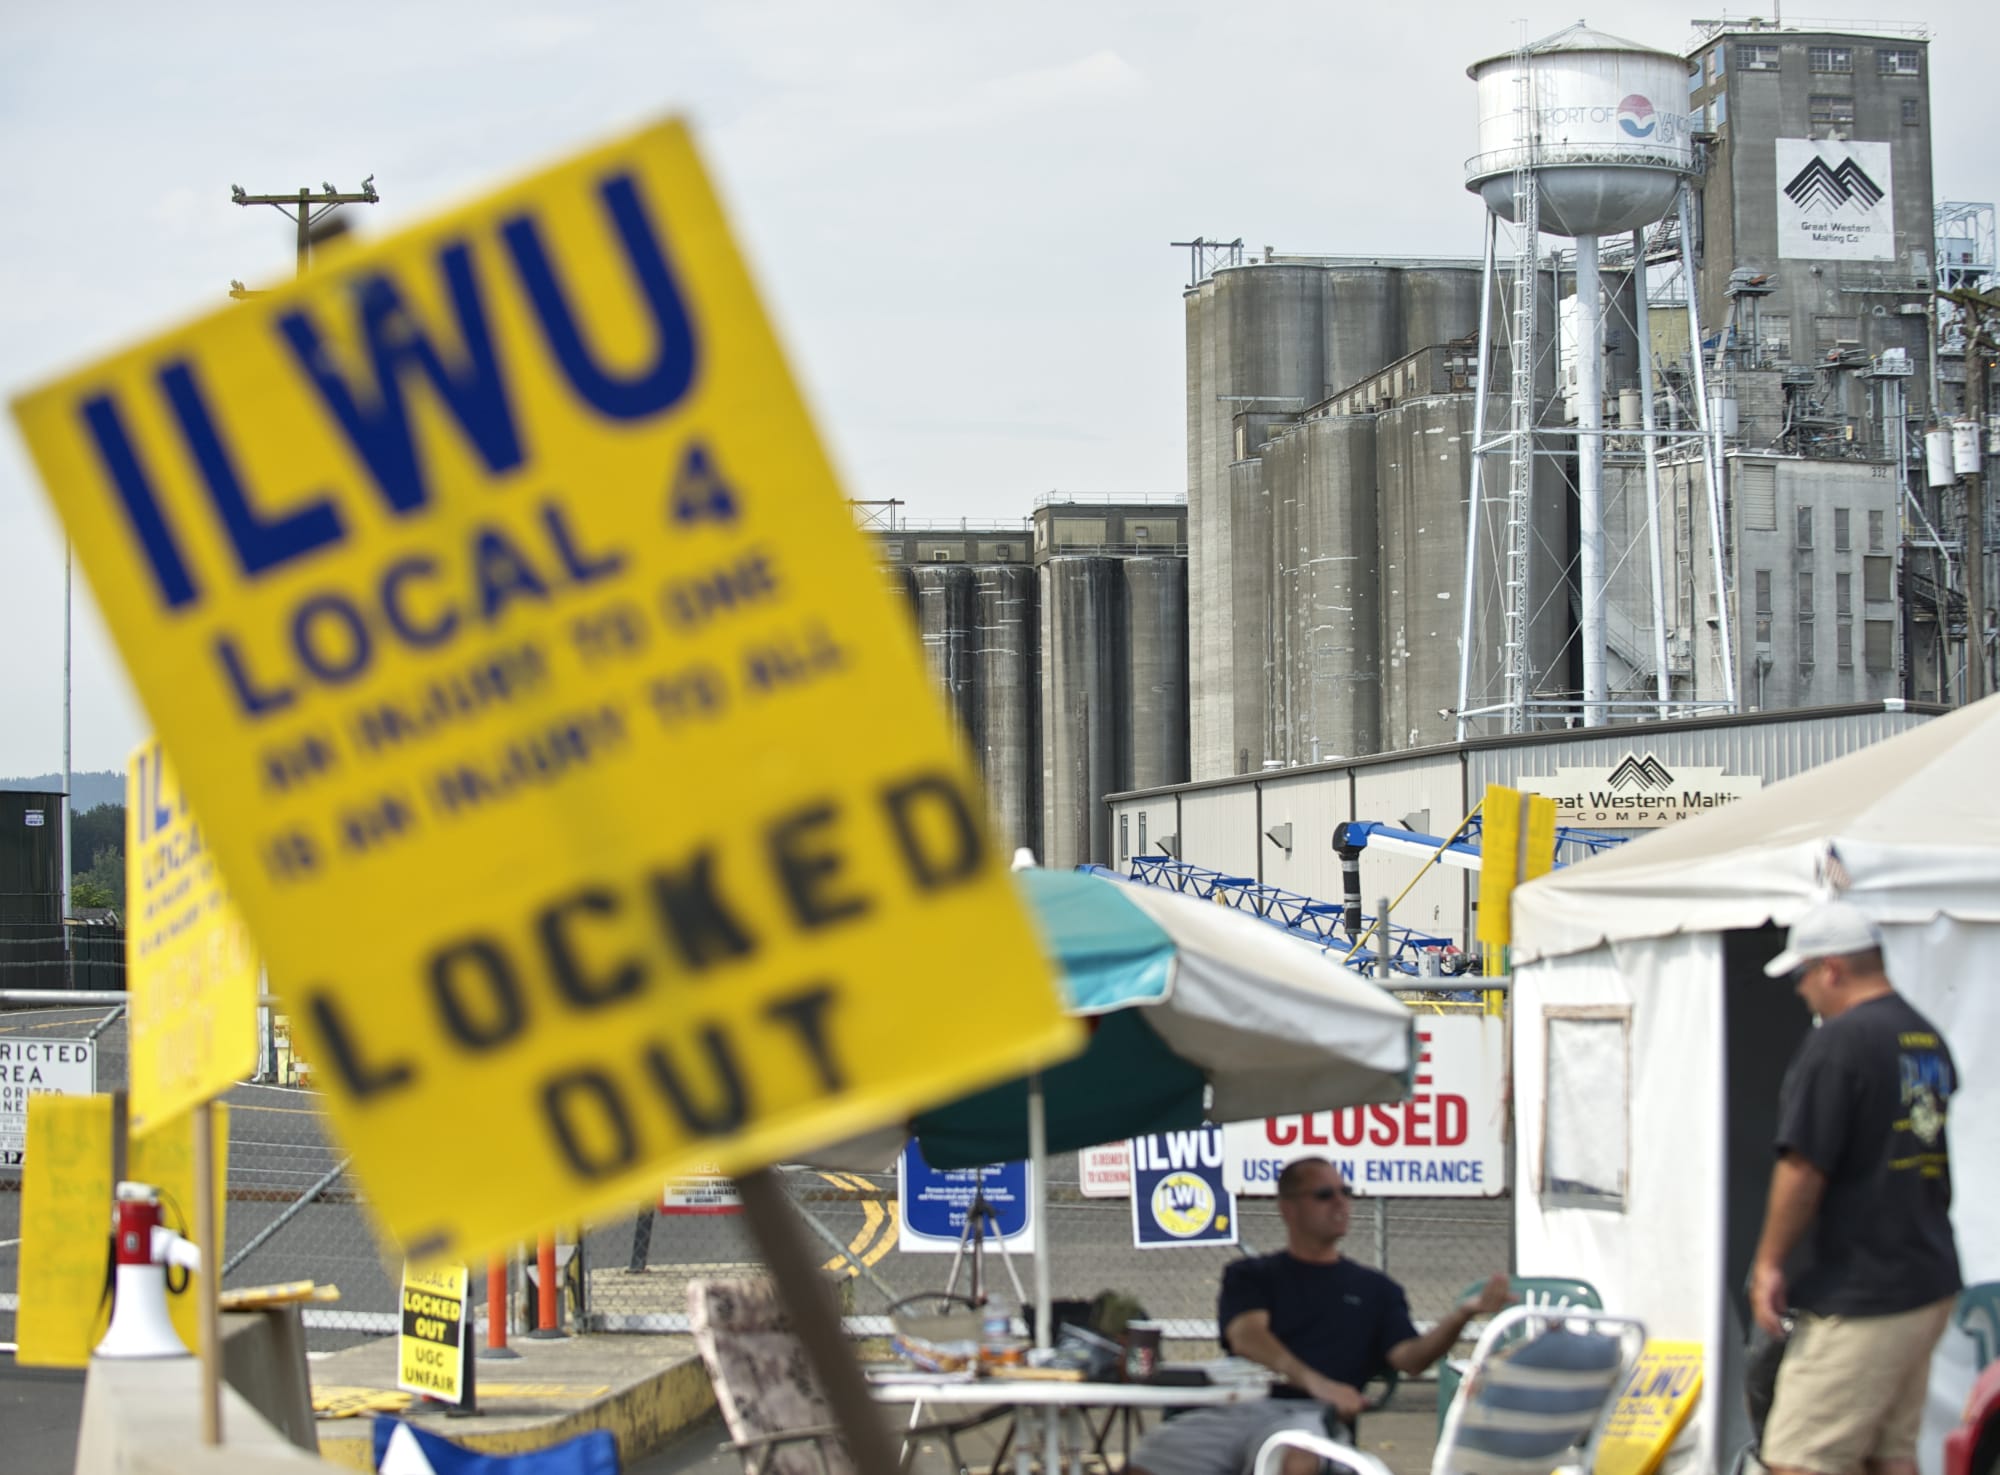 The Columbian files
United Grain Terminal operators and the International Longshore and Warehouse Union Local 4 reached an agreement in August on a new contract, ending a lockout that had began in February 2013.